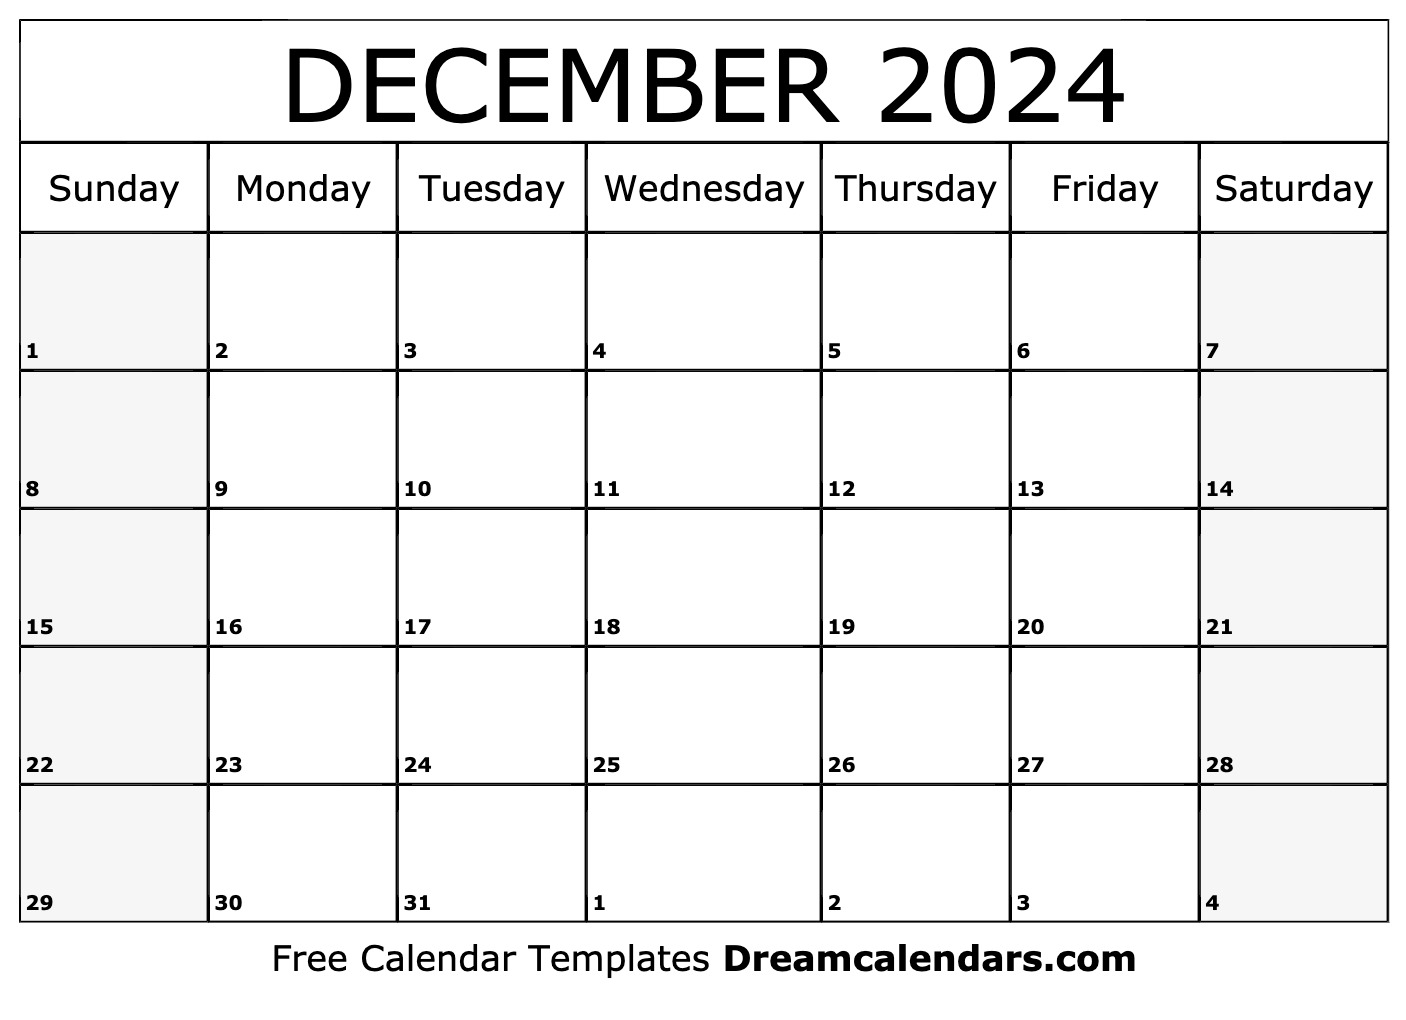 Free Printable Calendar Dec 2024 Jan 2024 New Ultimate Awesome Famous